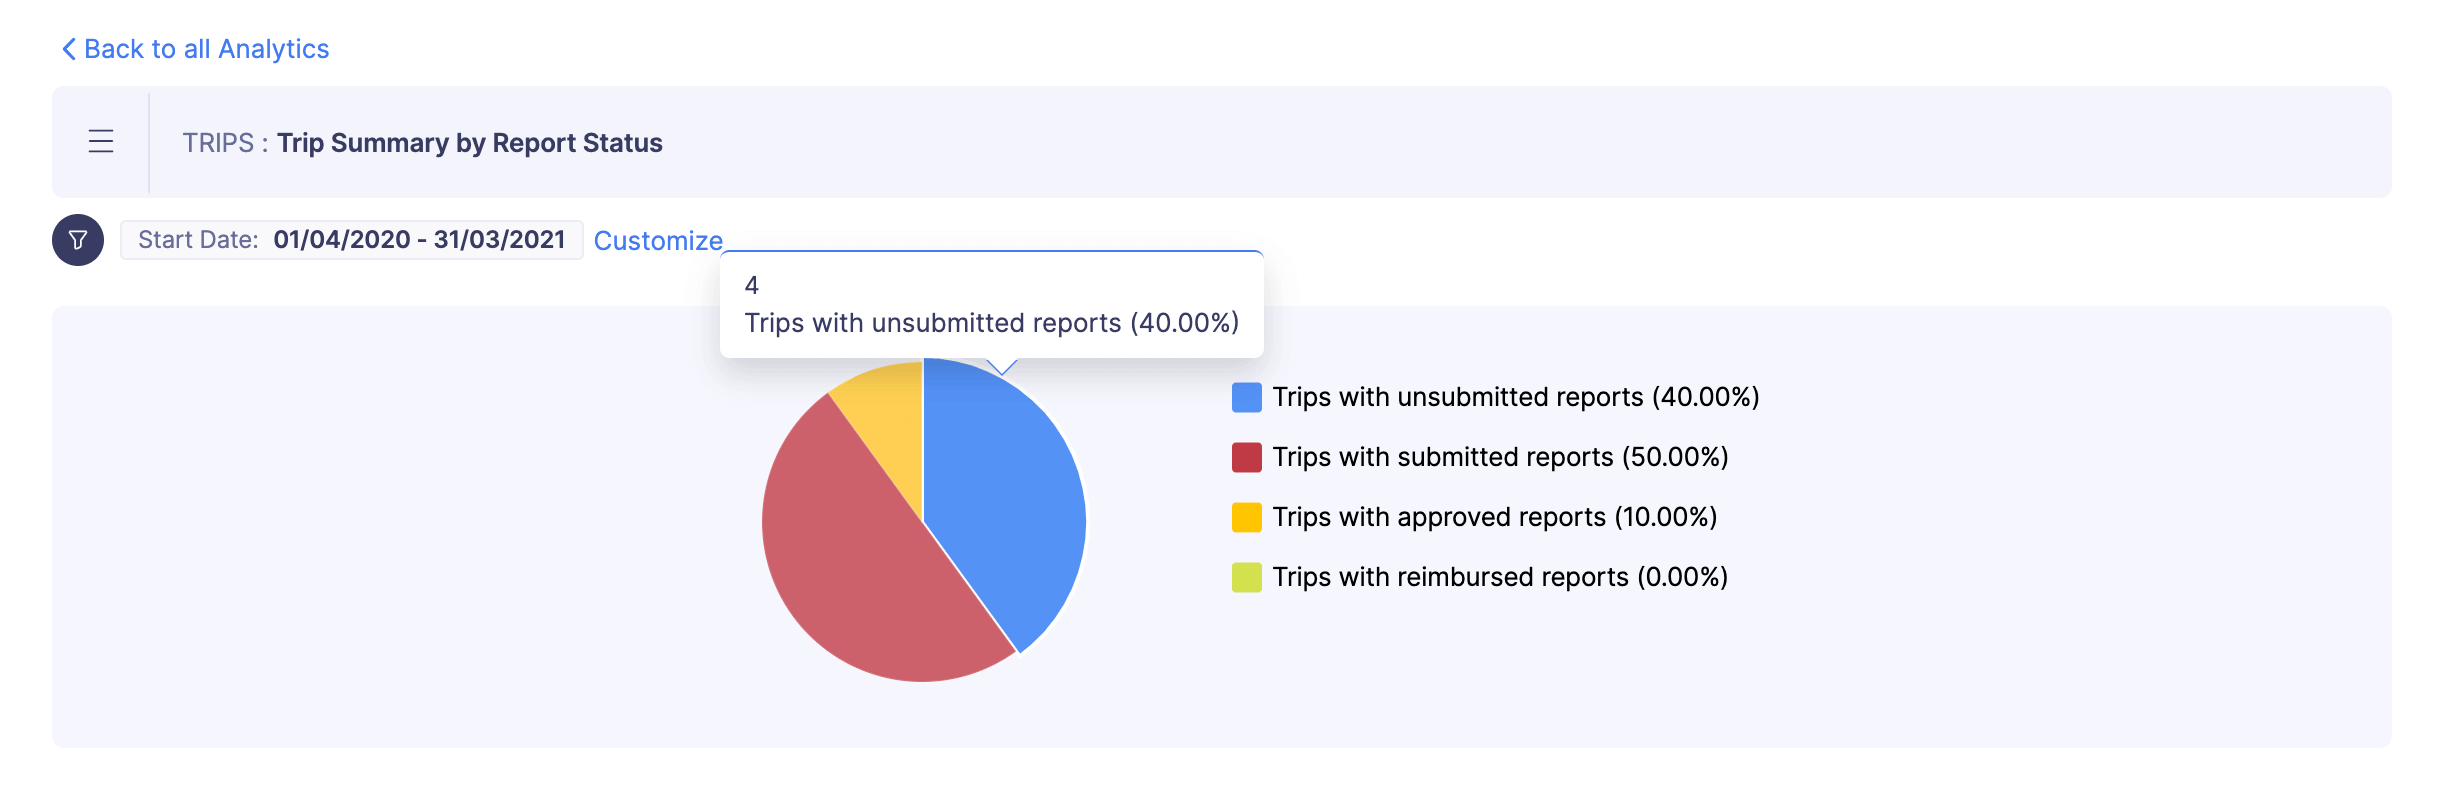 Trips Summary by Report Status